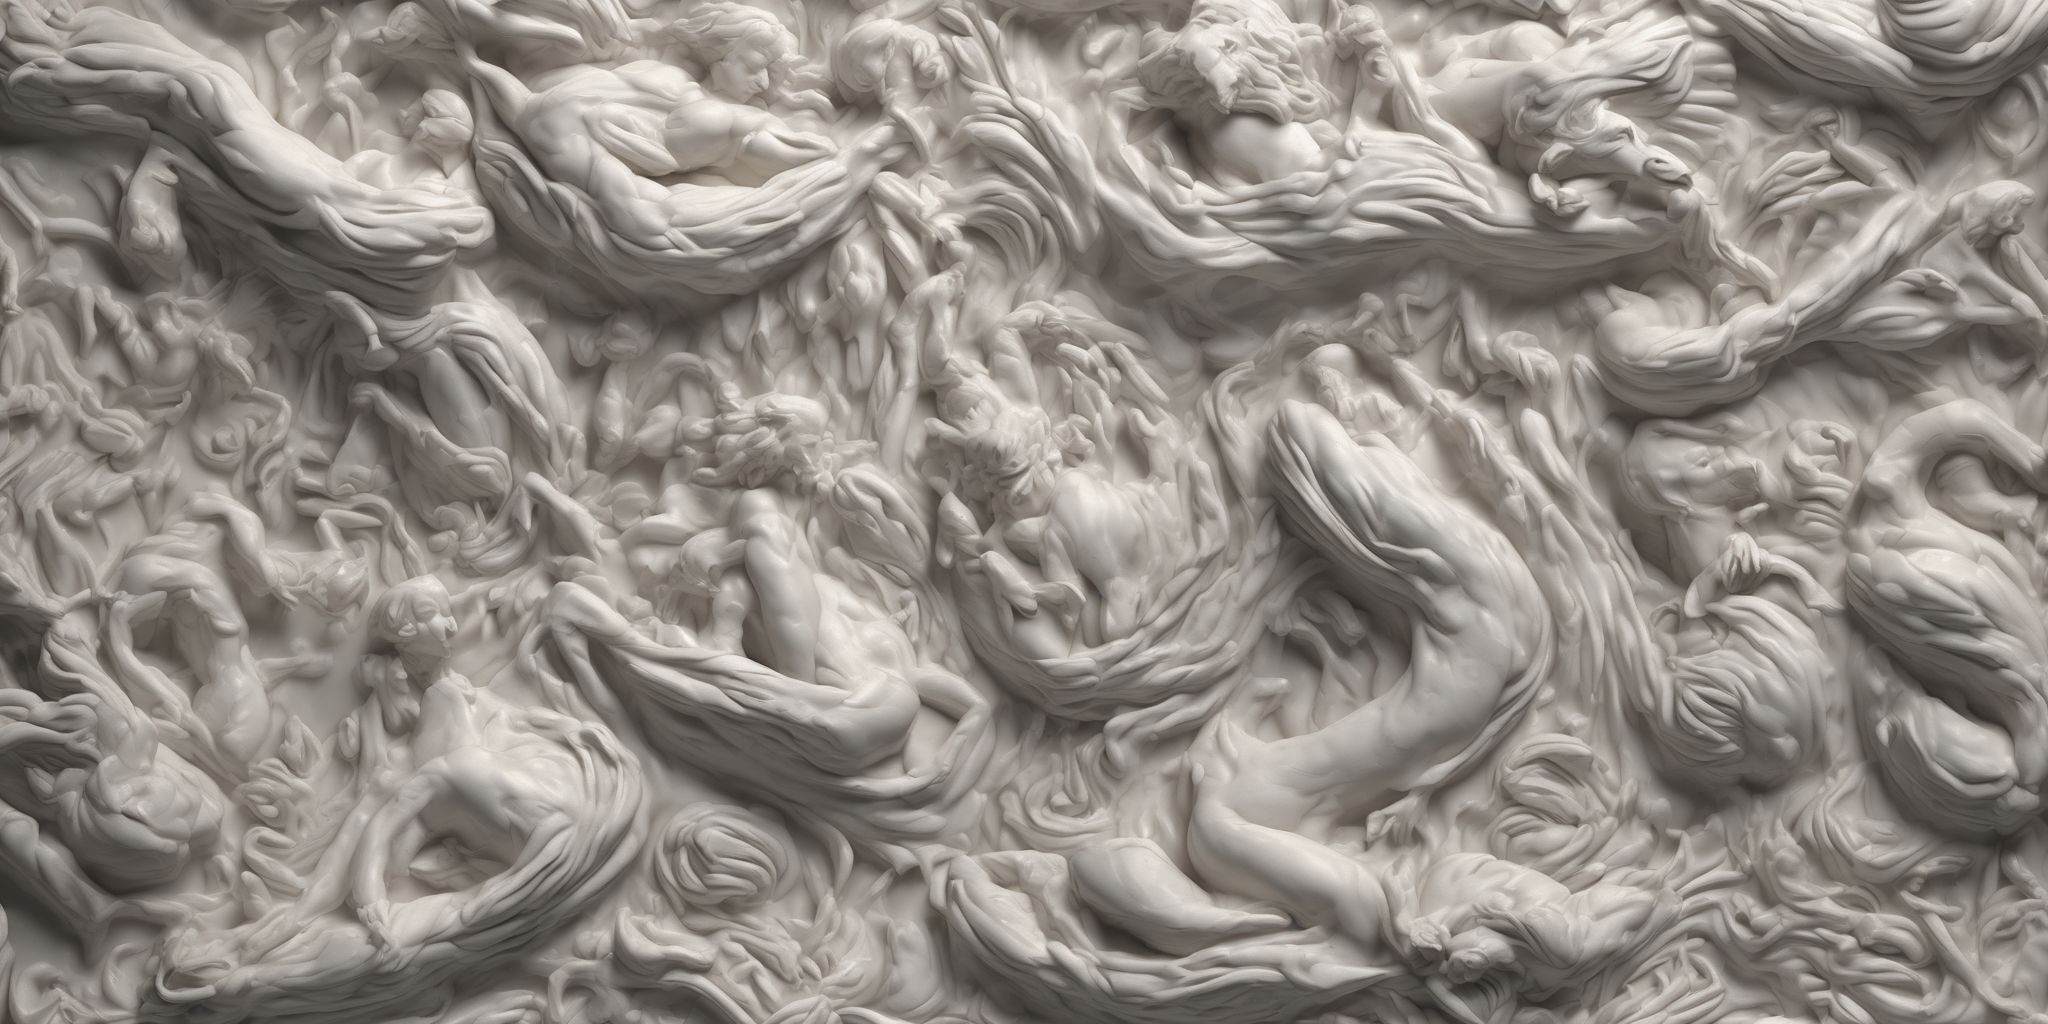 Relief  in realistic, photographic style